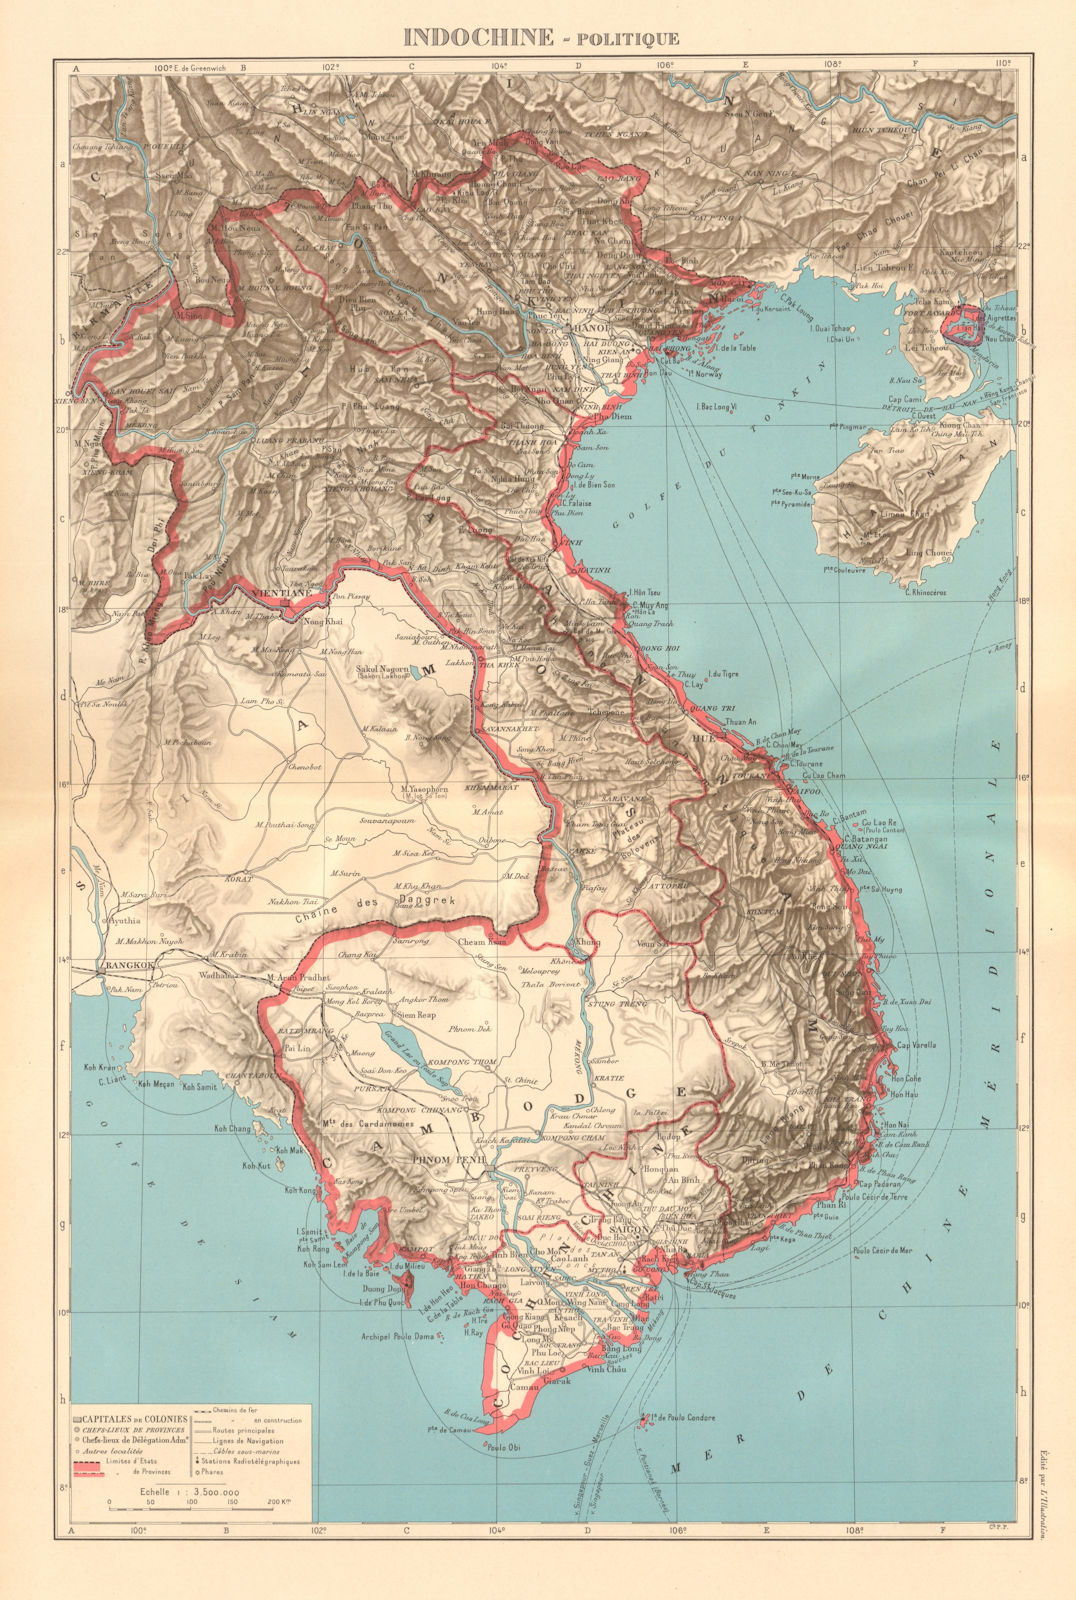 COLONIAL FRENCH INDOCHINA. Indochine française. Politique. Political 1938 map